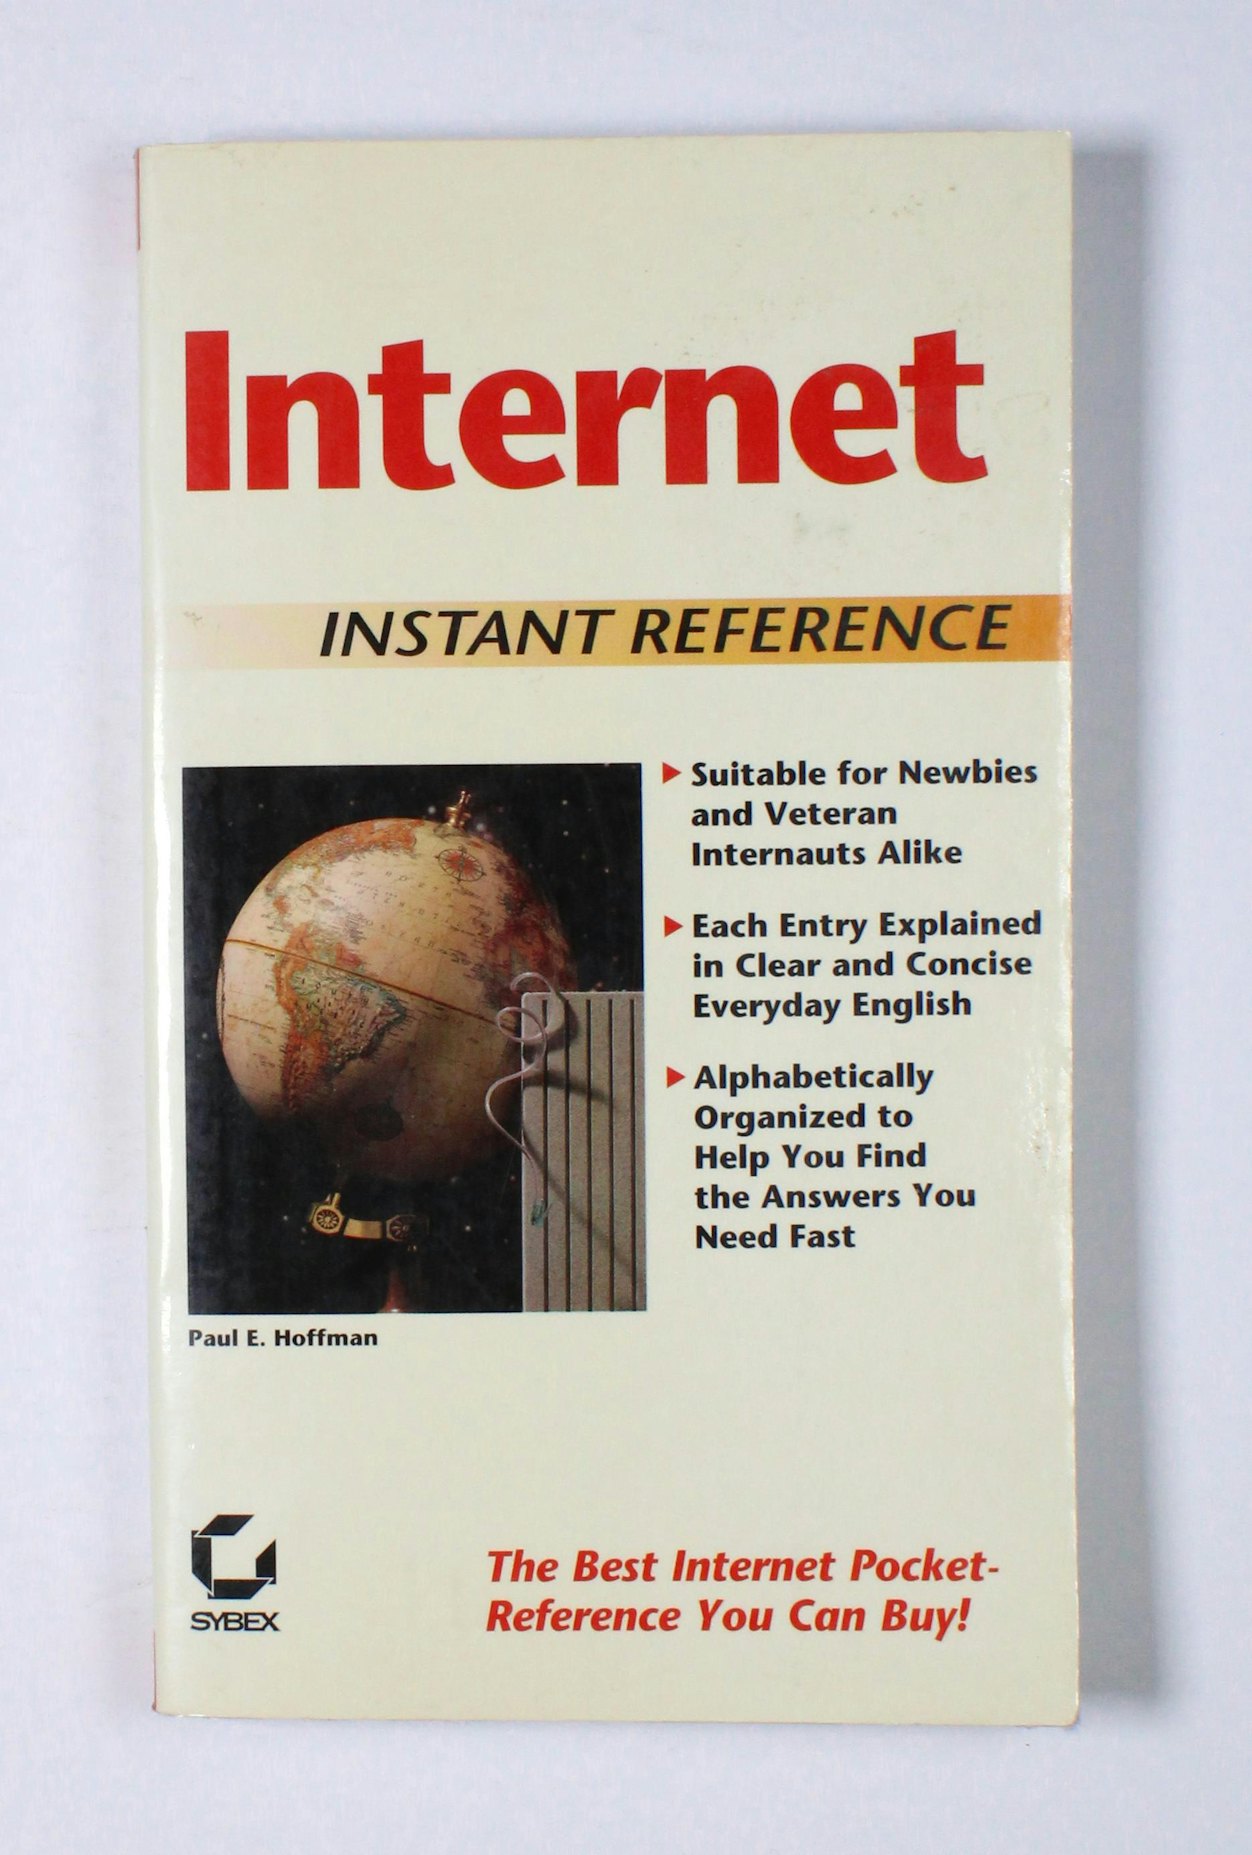 Internet - Instant Reference